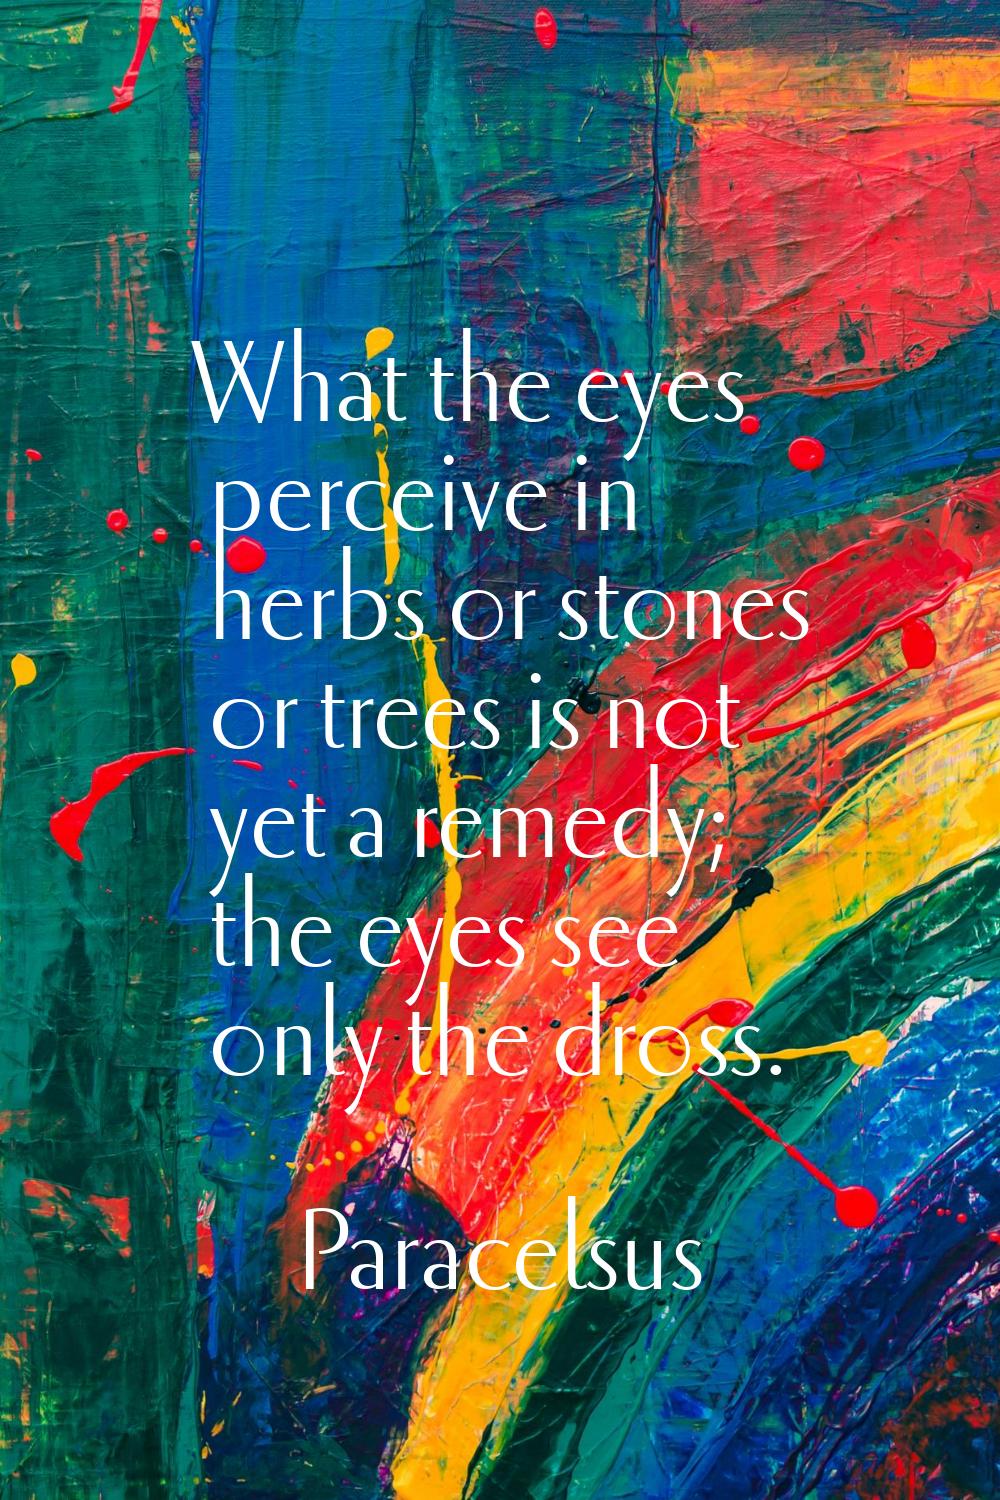 What the eyes perceive in herbs or stones or trees is not yet a remedy; the eyes see only the dross